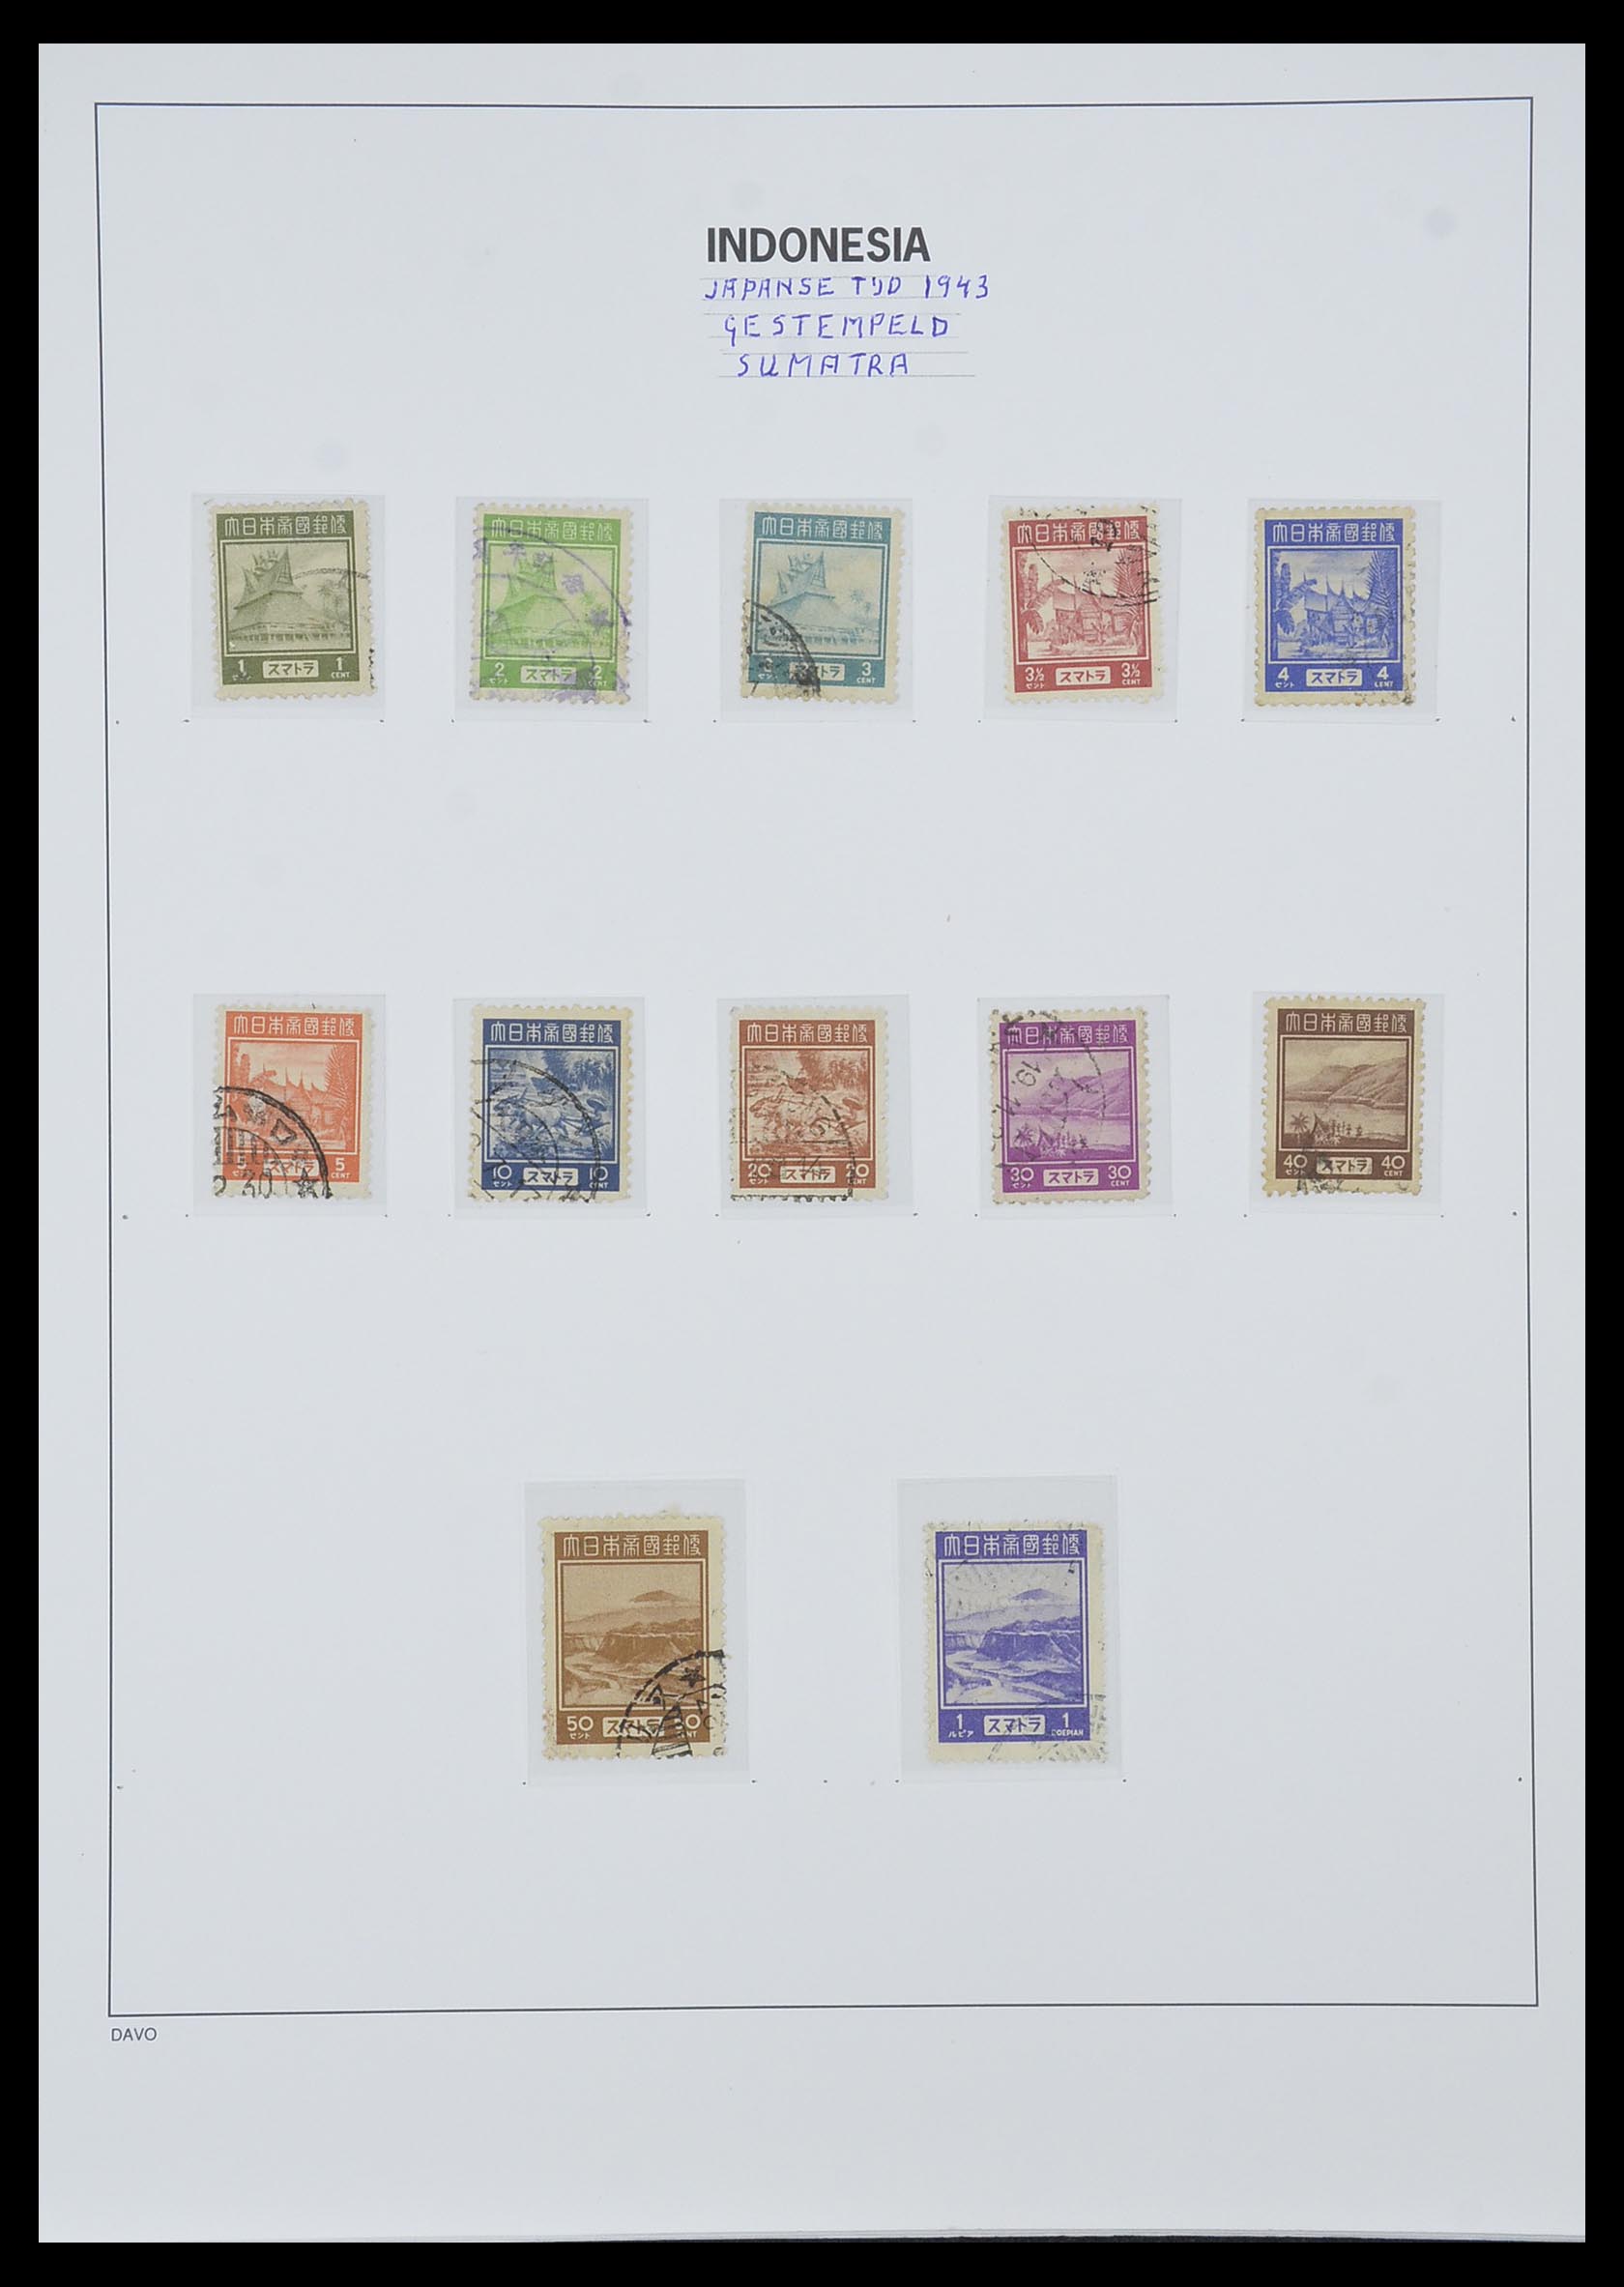 33988 002 - Stamp collection 33988 Vienna printings Indonesia.